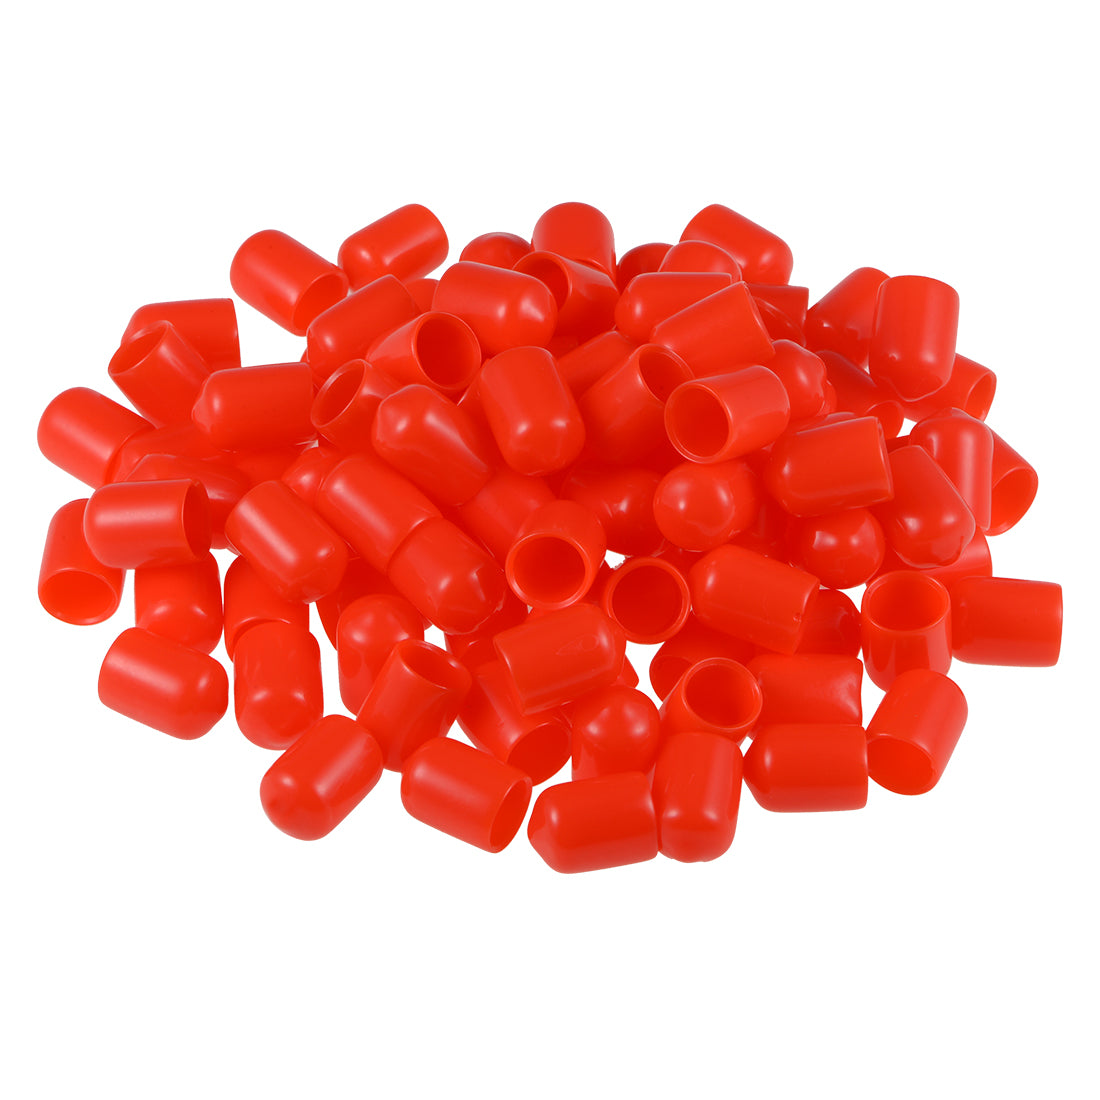 uxcell Uxcell 200pcs Rubber End Caps 9.5mm ID 18mm Height Screw Thread Protectors Red